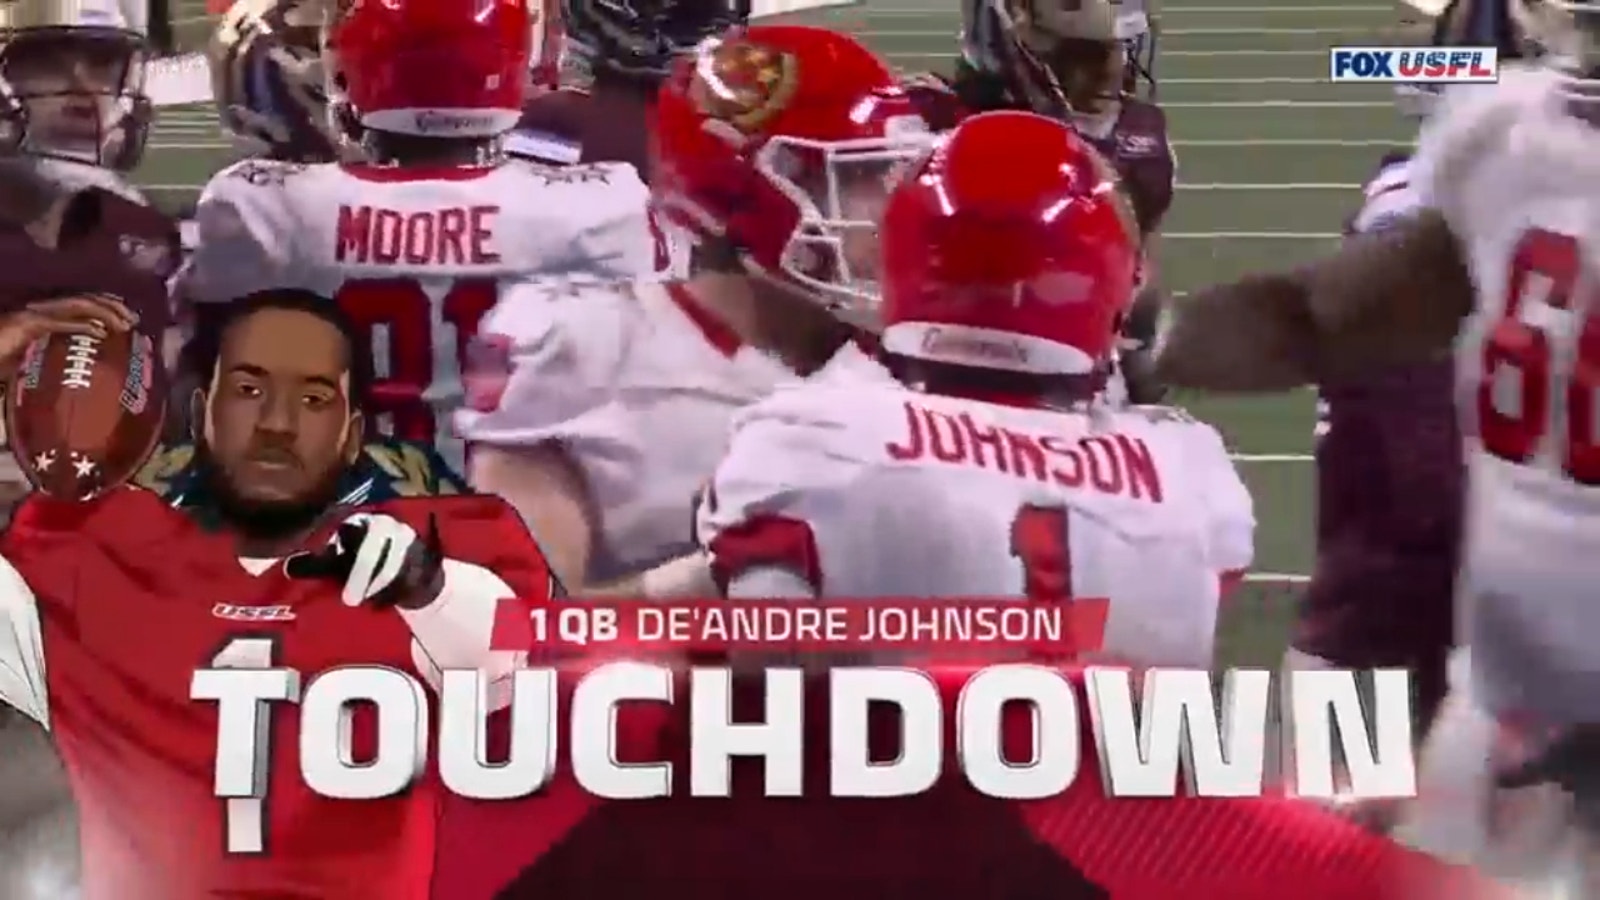 After a 71-yard rushing play, De'Andre Johnson runs it in for 9-yard TD